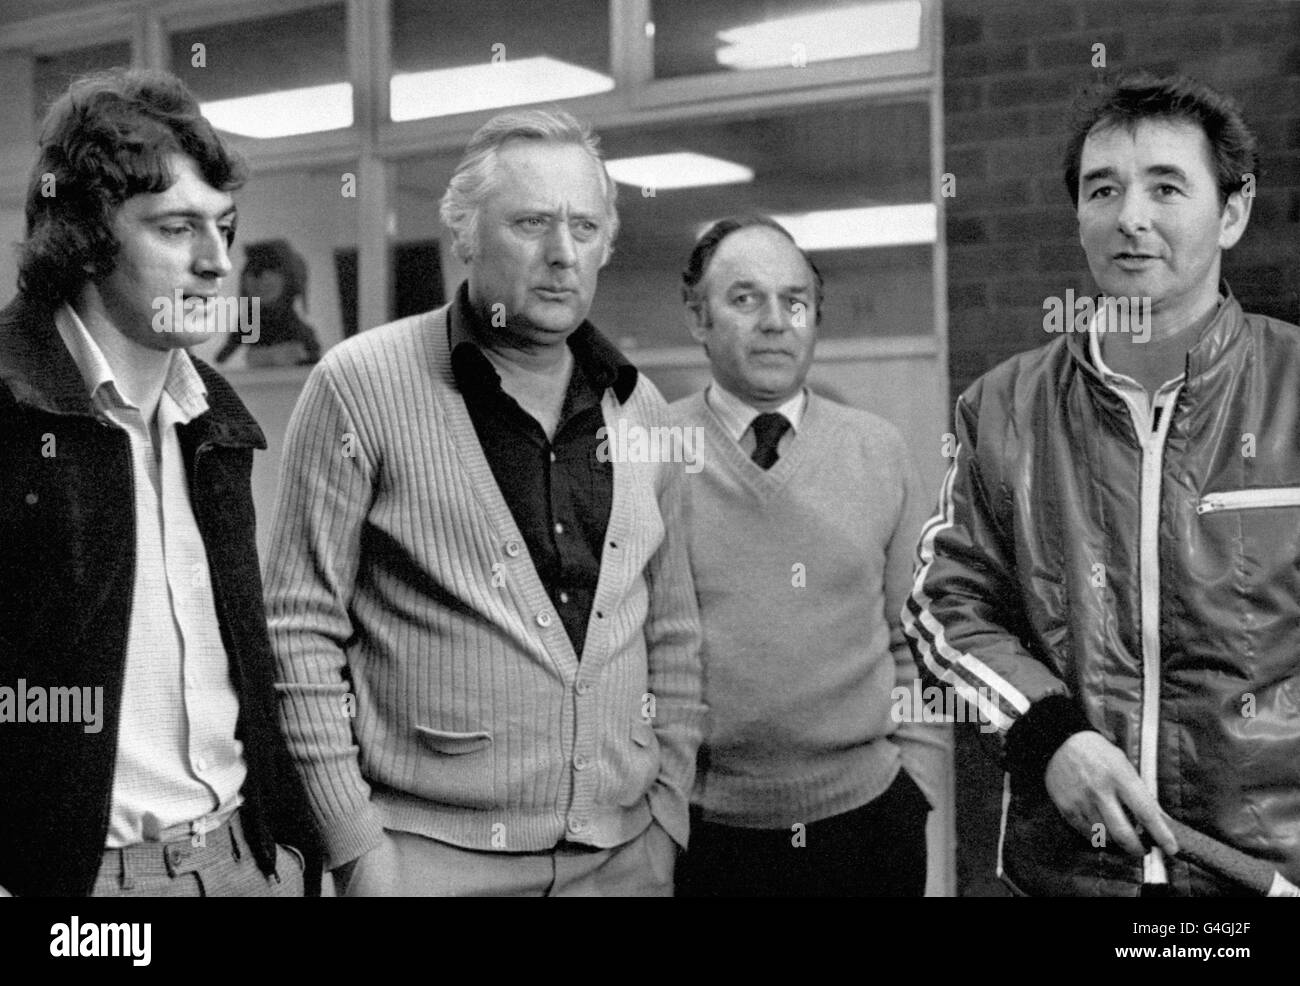 Birmingham City footballer Trevor Francis emerges from the City Ground in Nottingham after a five-hour meeting with, from second left, Nottingham Forest assistant manager Peter Taylor, secretary Ken Smailes, and manager Brian Clough, to discuss his possible move to Forest. Stock Photo